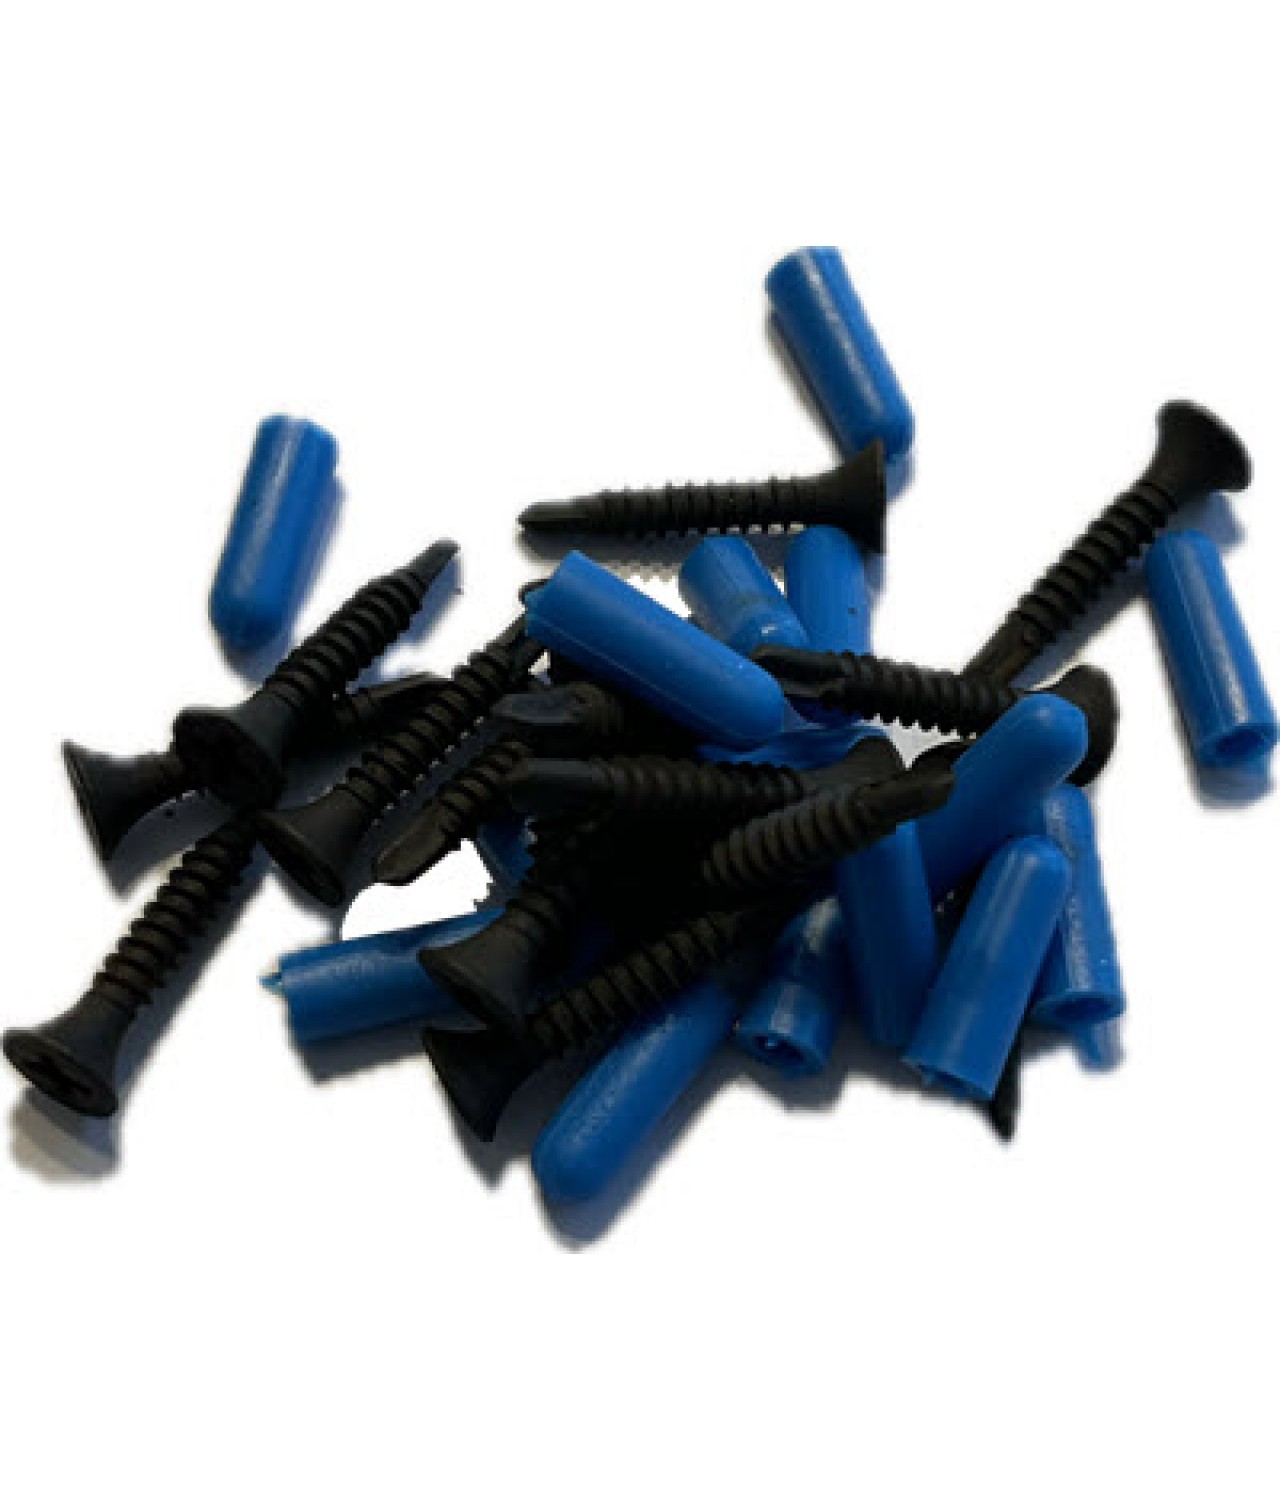 Self-tapping screws with protective covers are included free of charge with all AluStar doors